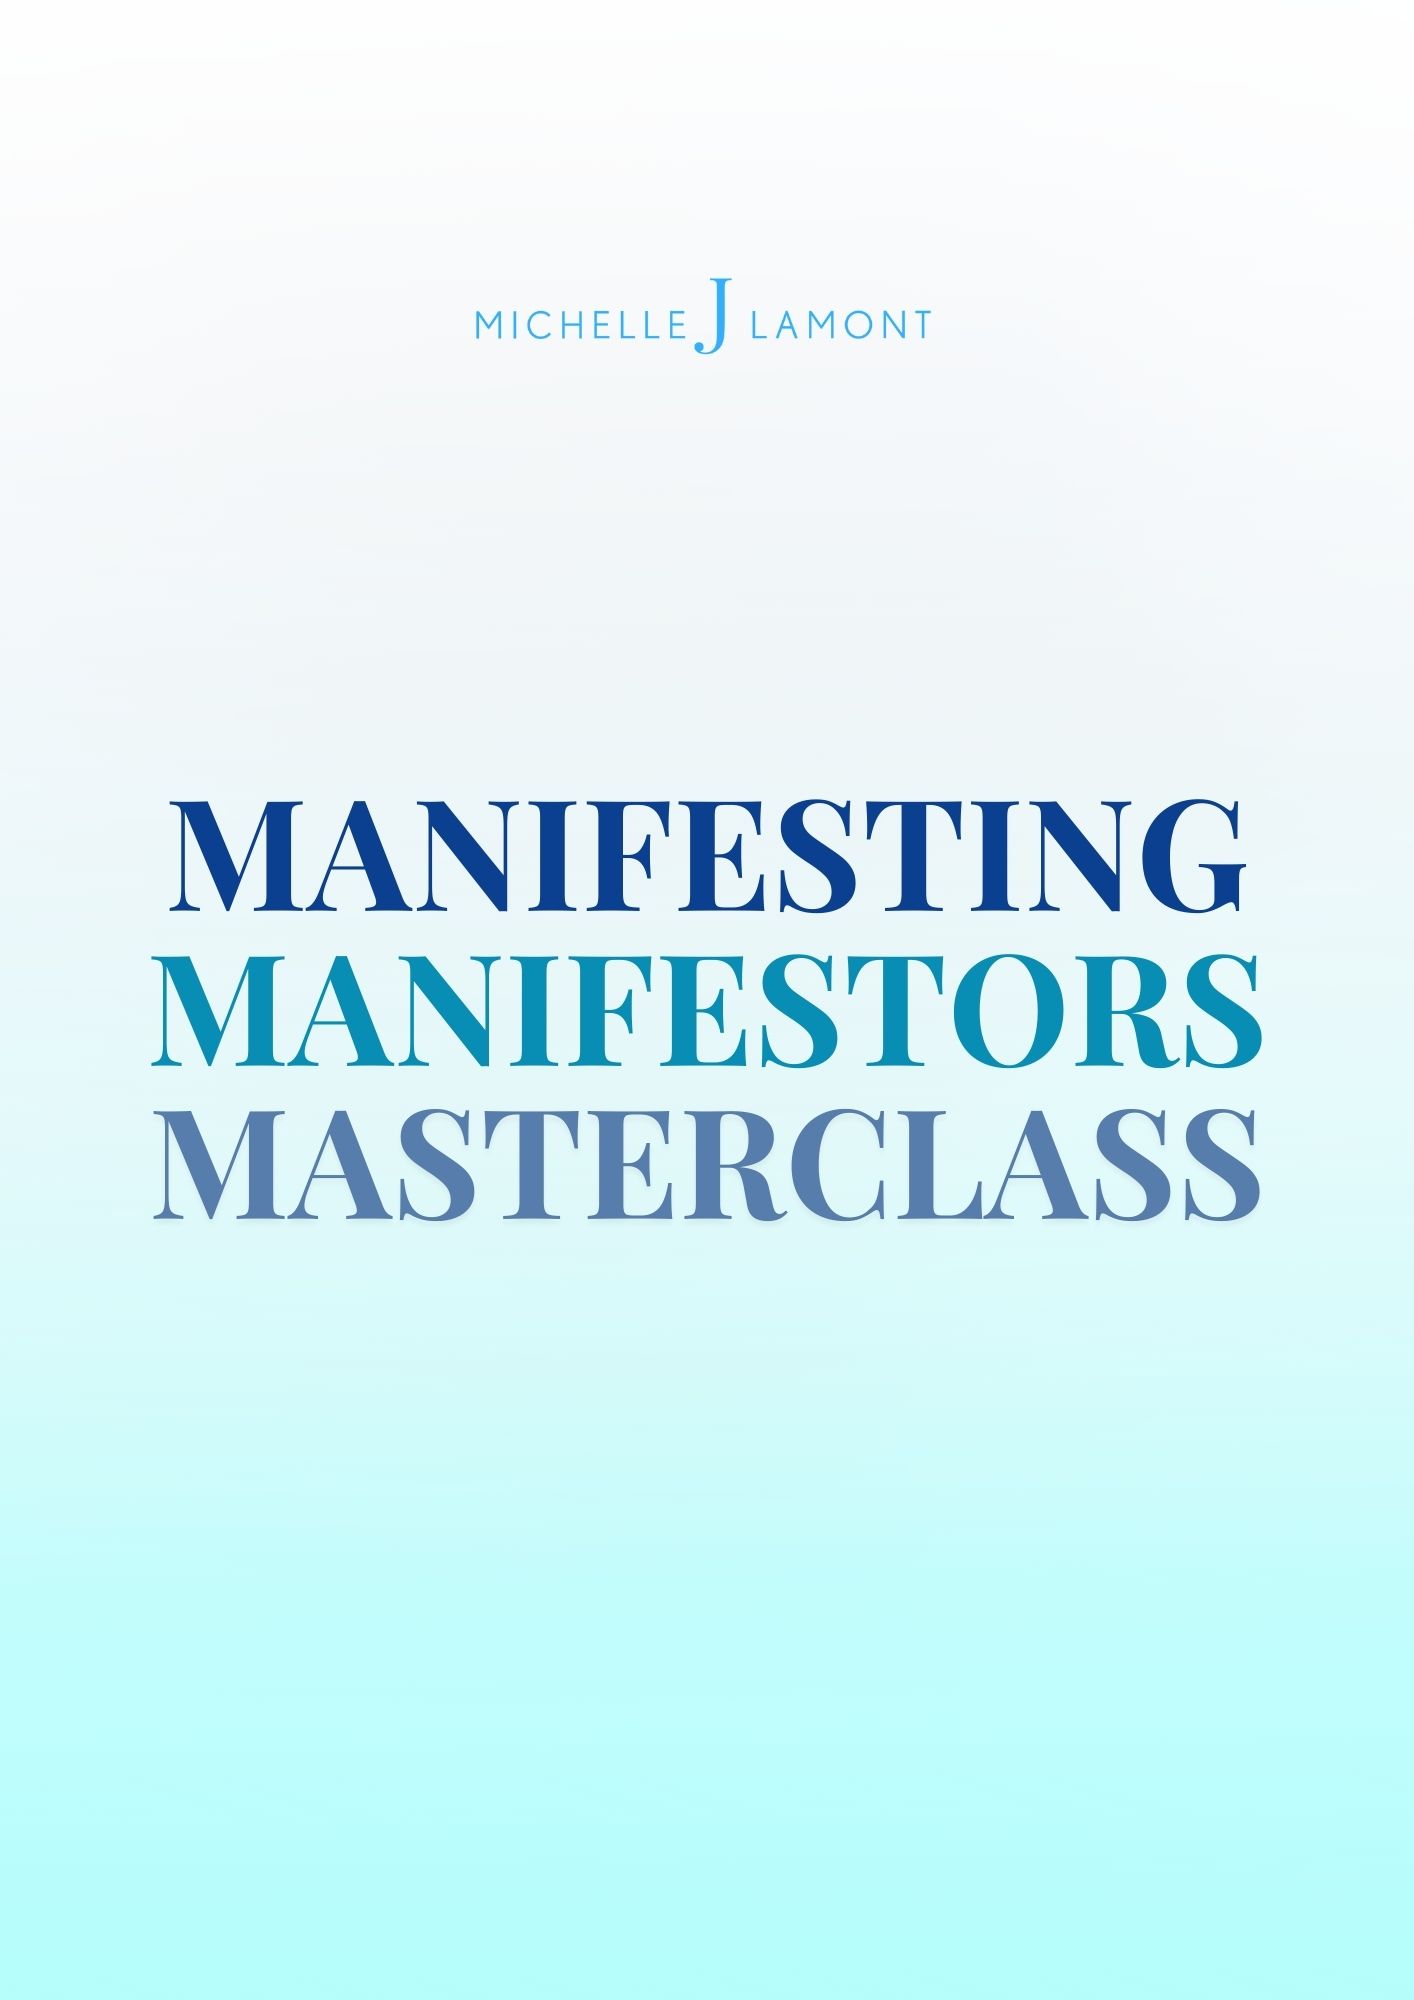 Online Manifestation Course Now Available